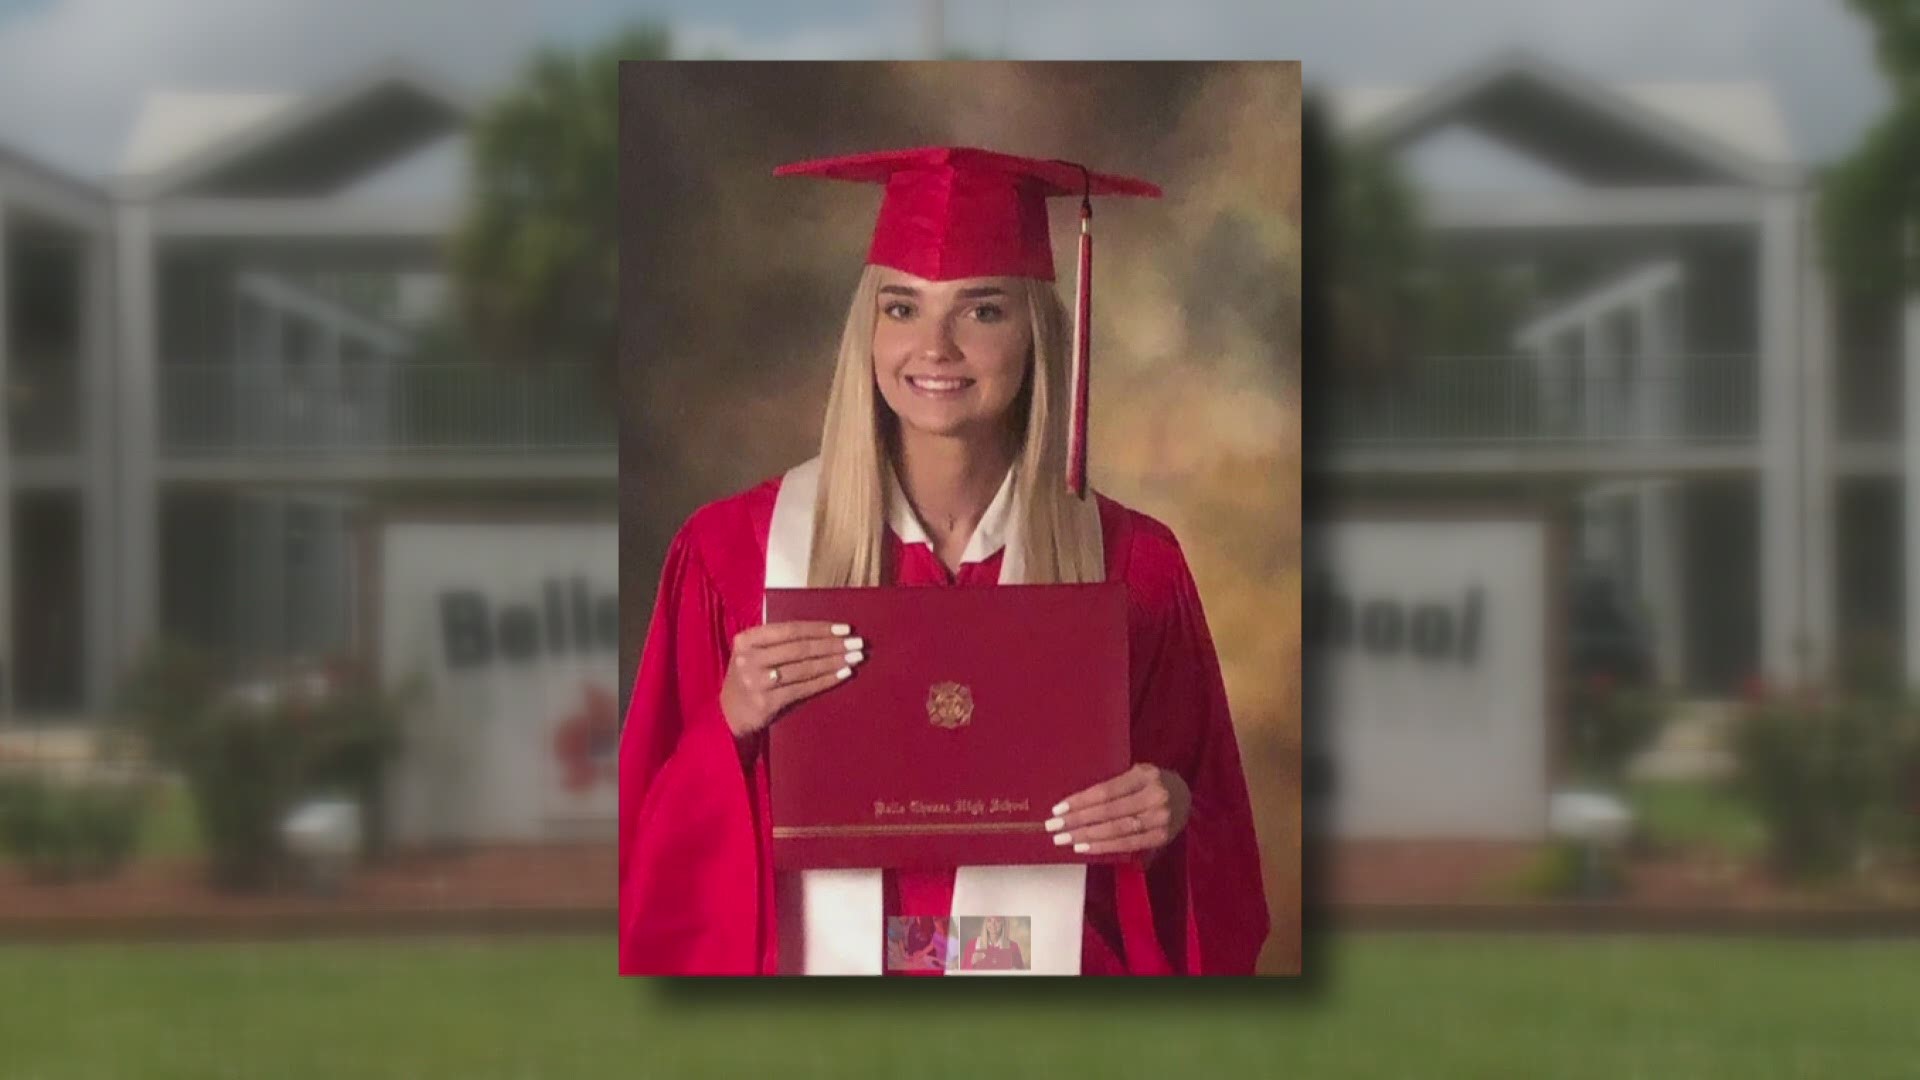 The family of an 18-year-old high school senior, set to graduate, is now mourning her loss after taking what she thought was a Percocet leading to a deadly overdose.